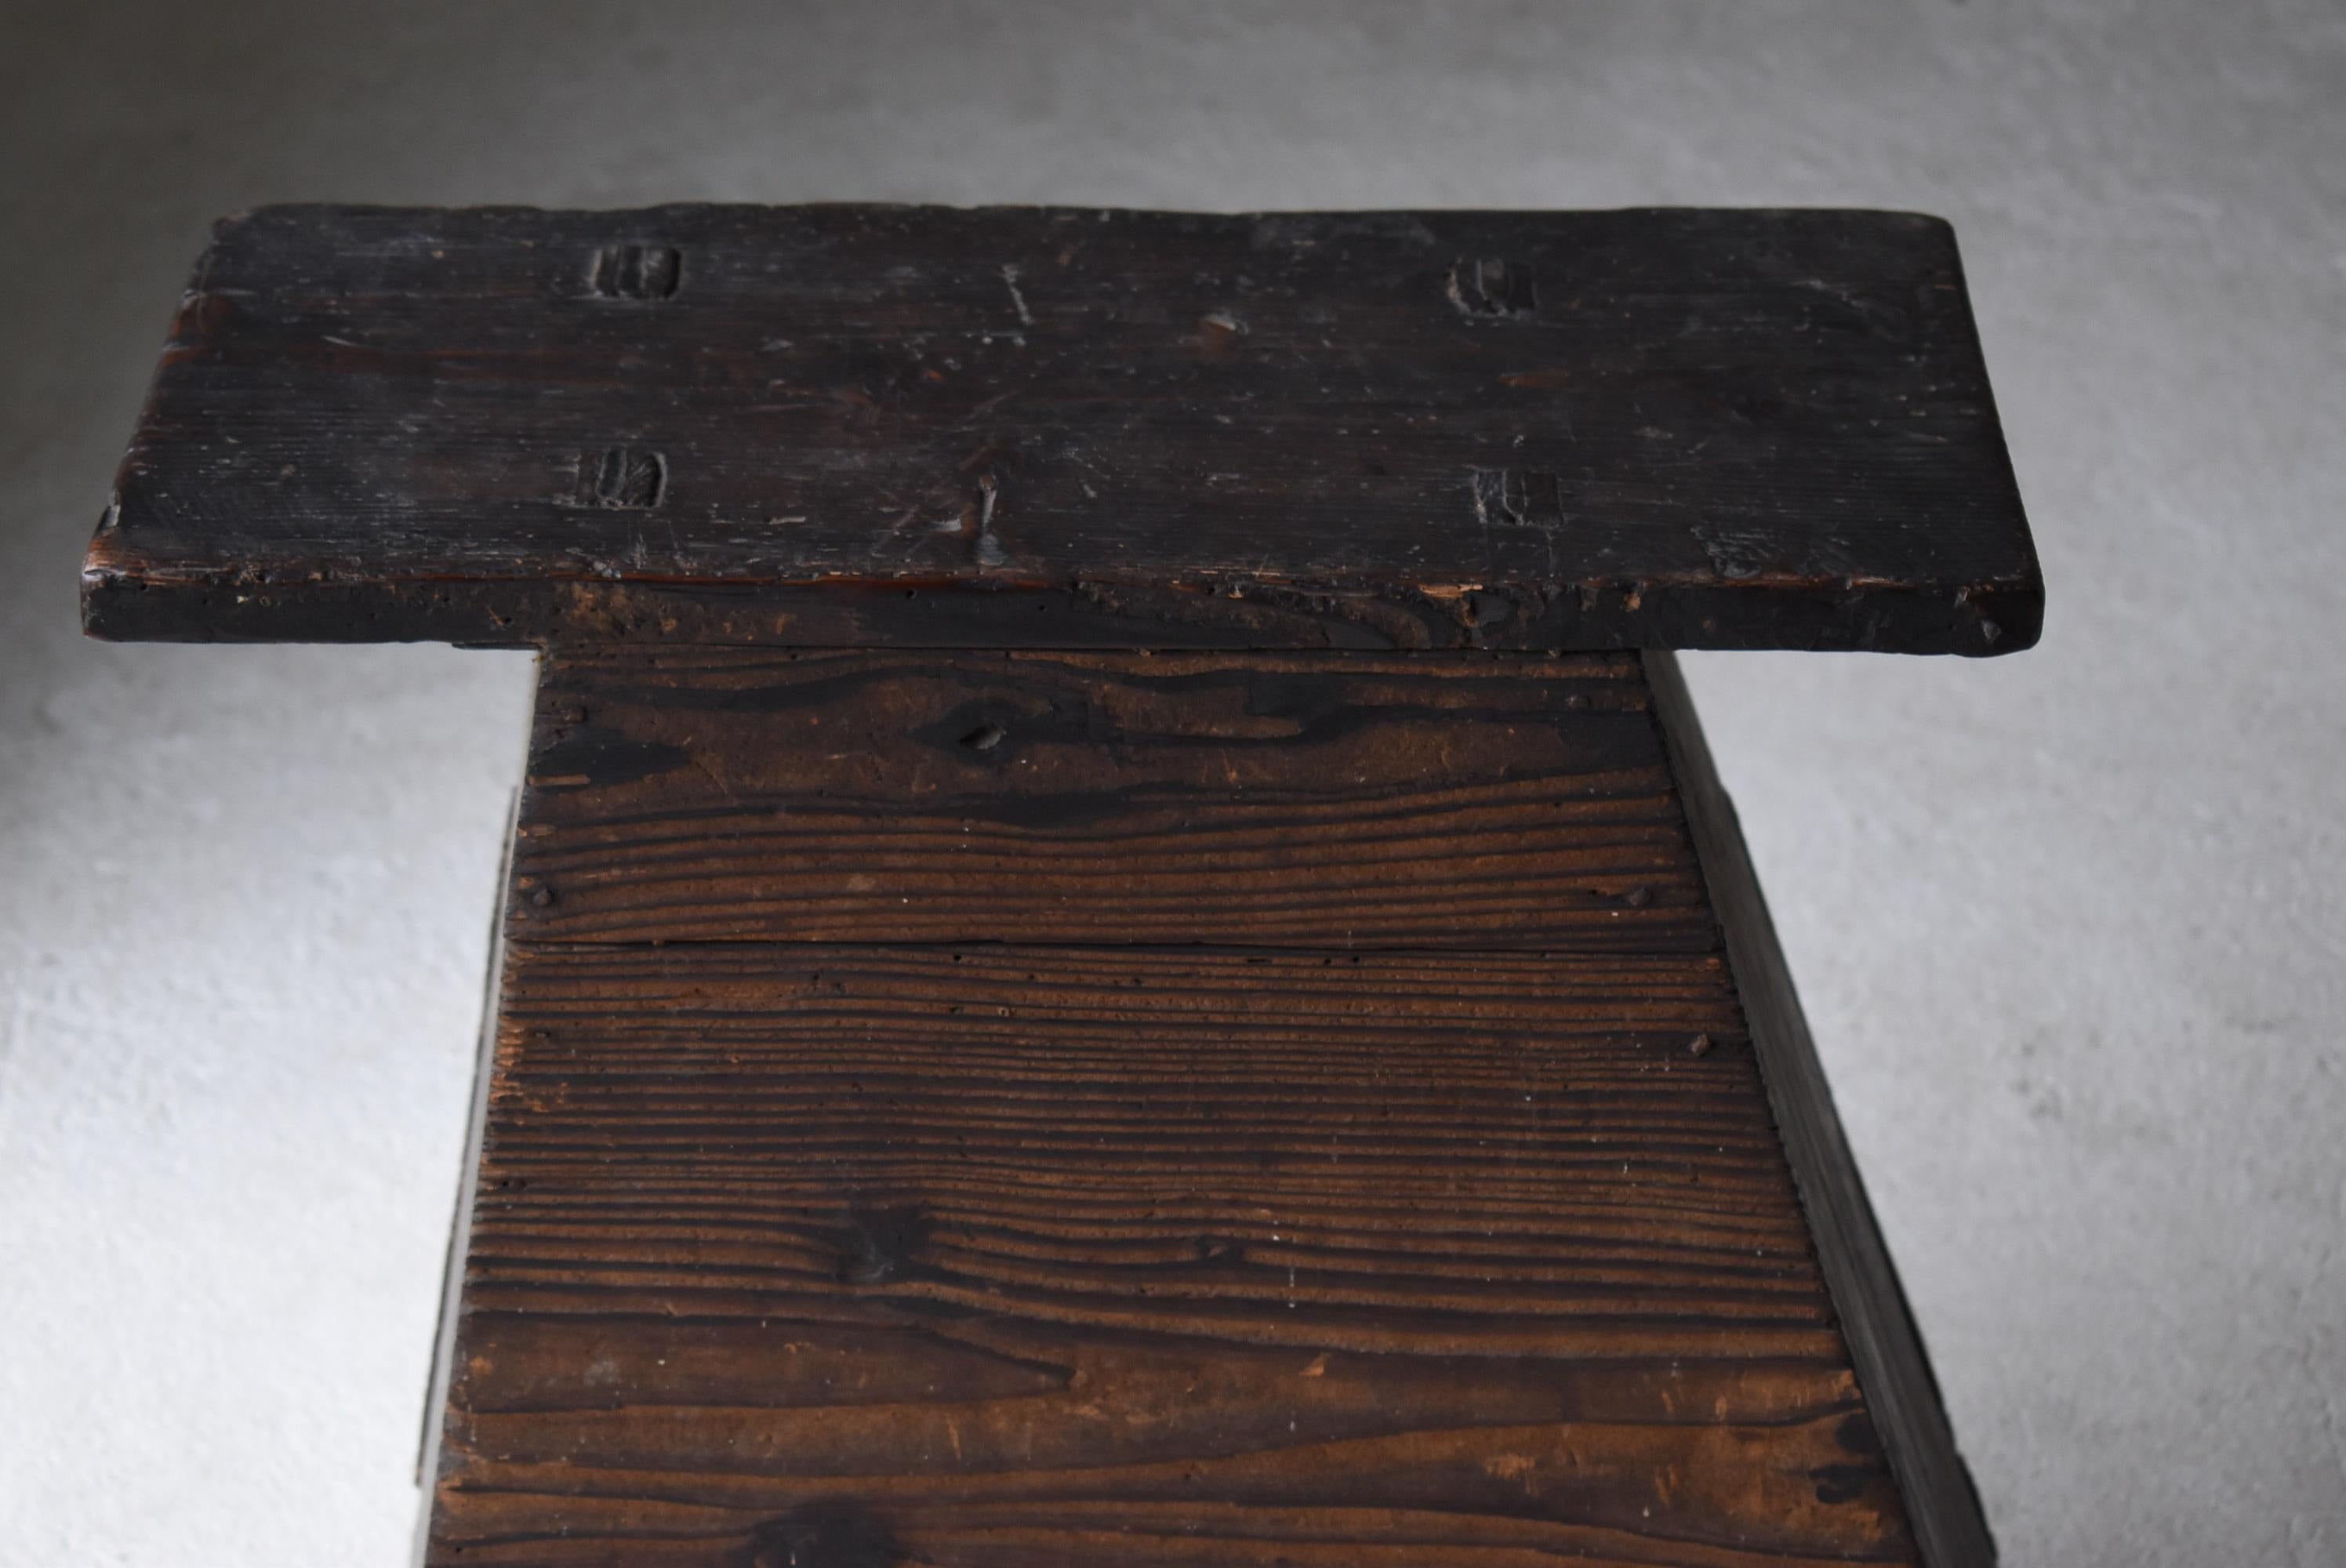 It is an old Japanese stepping stone.
It can also be used as a chair or stool.
It is an item from the Meiji era. (1860-1900s)
The material is cedar.

It was repaired in an old Japanese house and used with caution.
I feel a deep